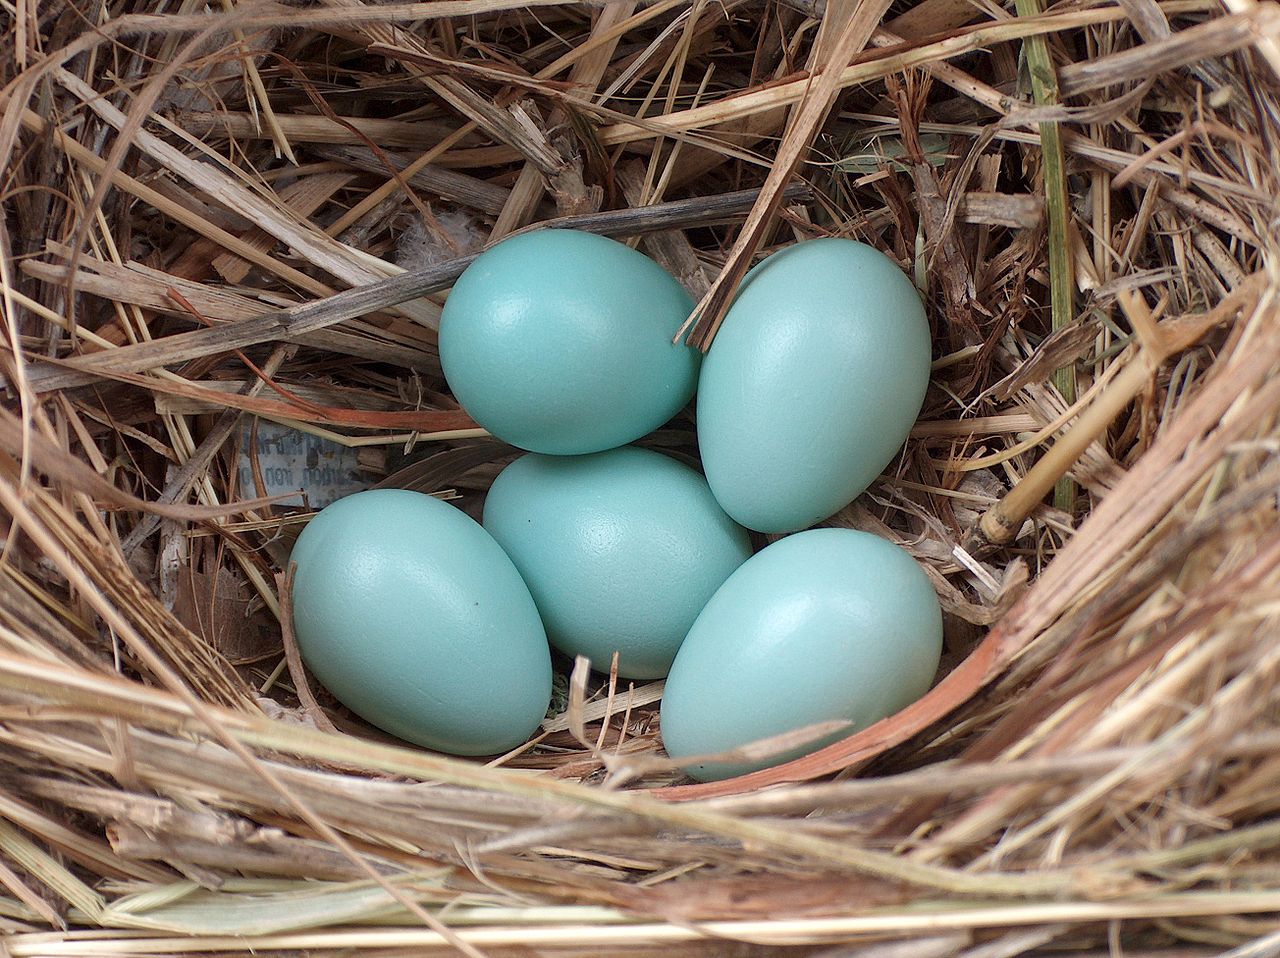 Starling eggs. Laying of Common Starling Eggs